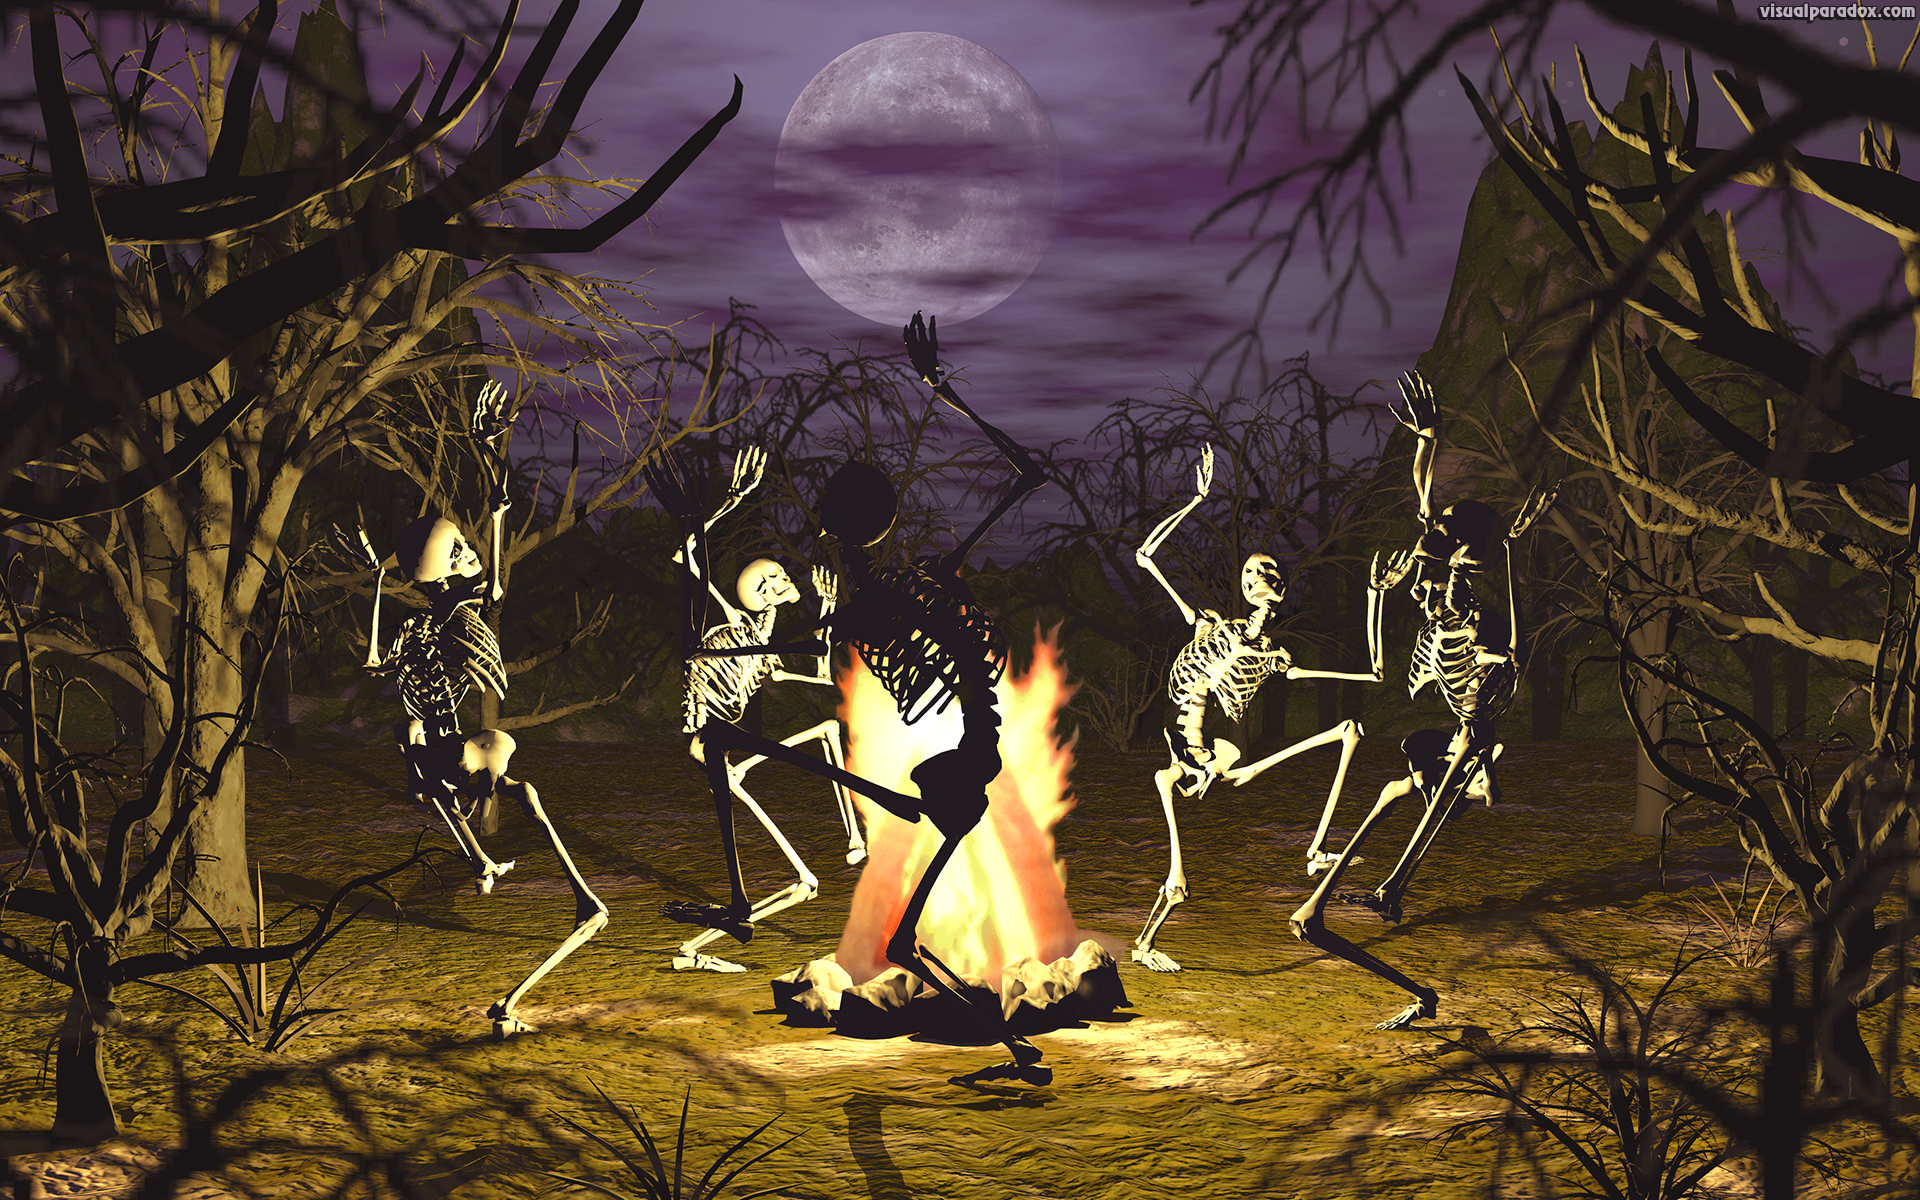 dancing, skeletons, campfire, coven, gothic, undead, conjuring, bones, full moon, trees, scary, haunted, halloween, skeleton, 3d, wallpaper